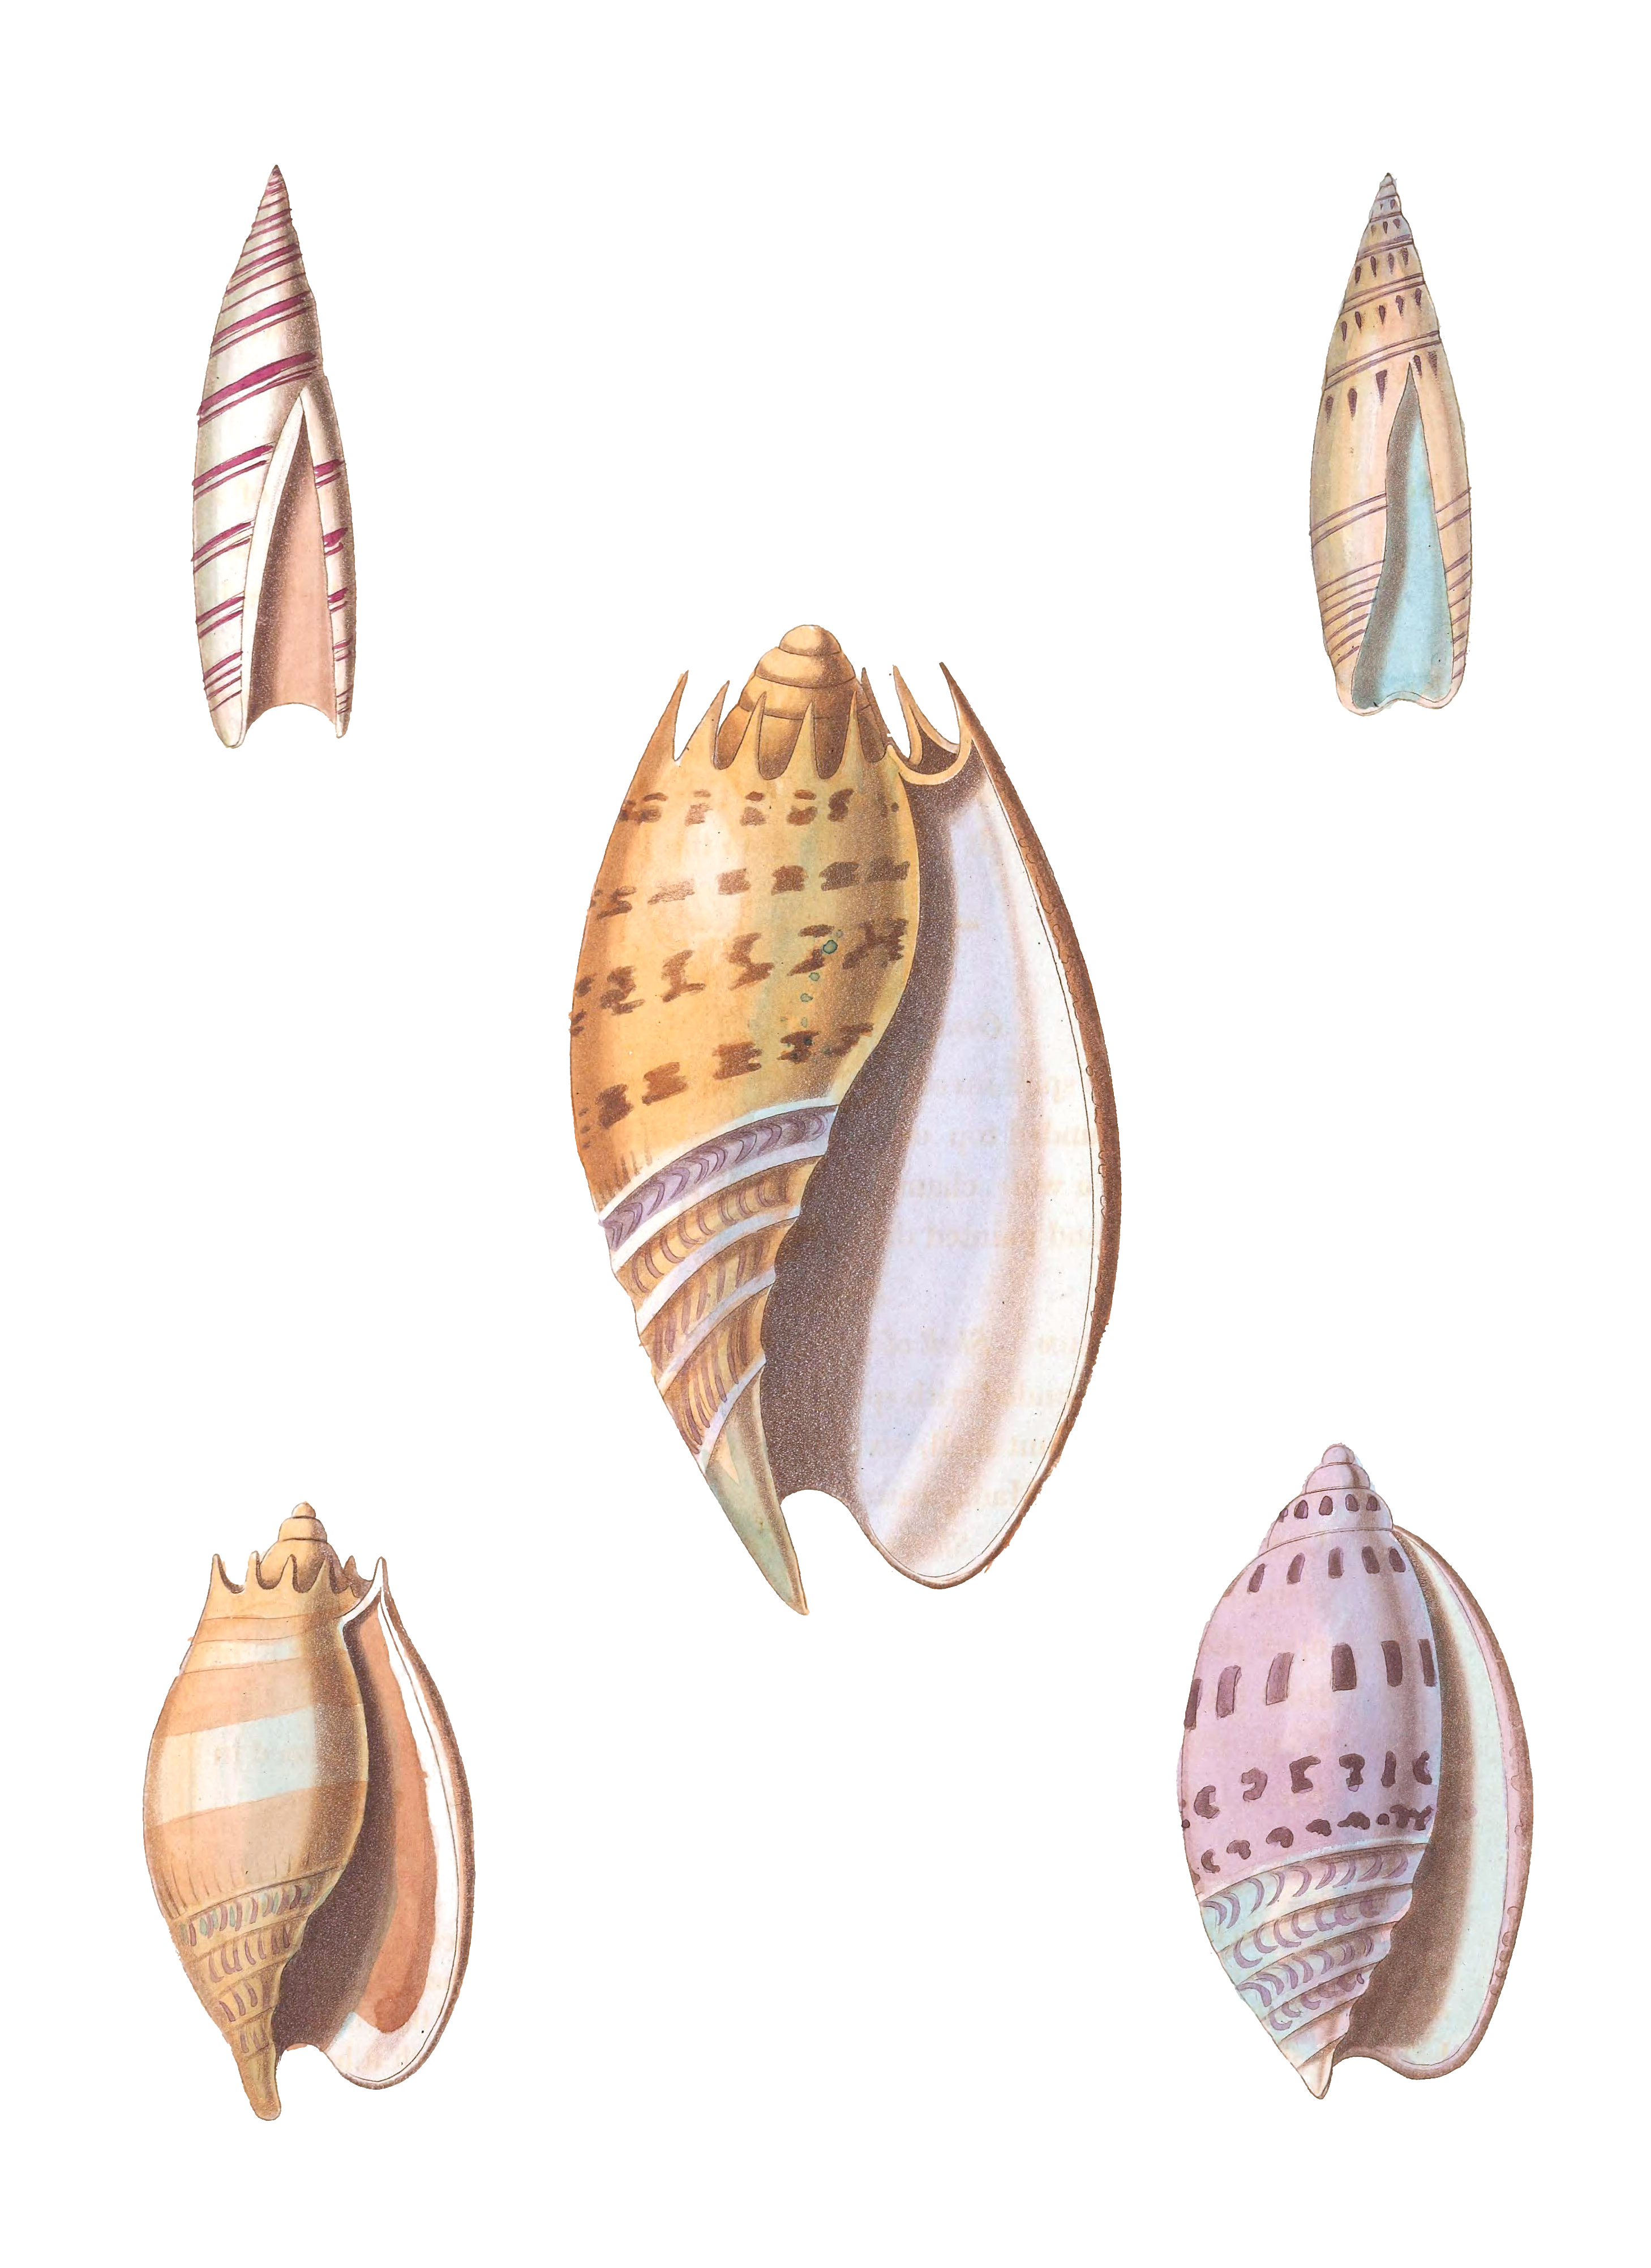 160 Various Shell illustration by Vero Shaw